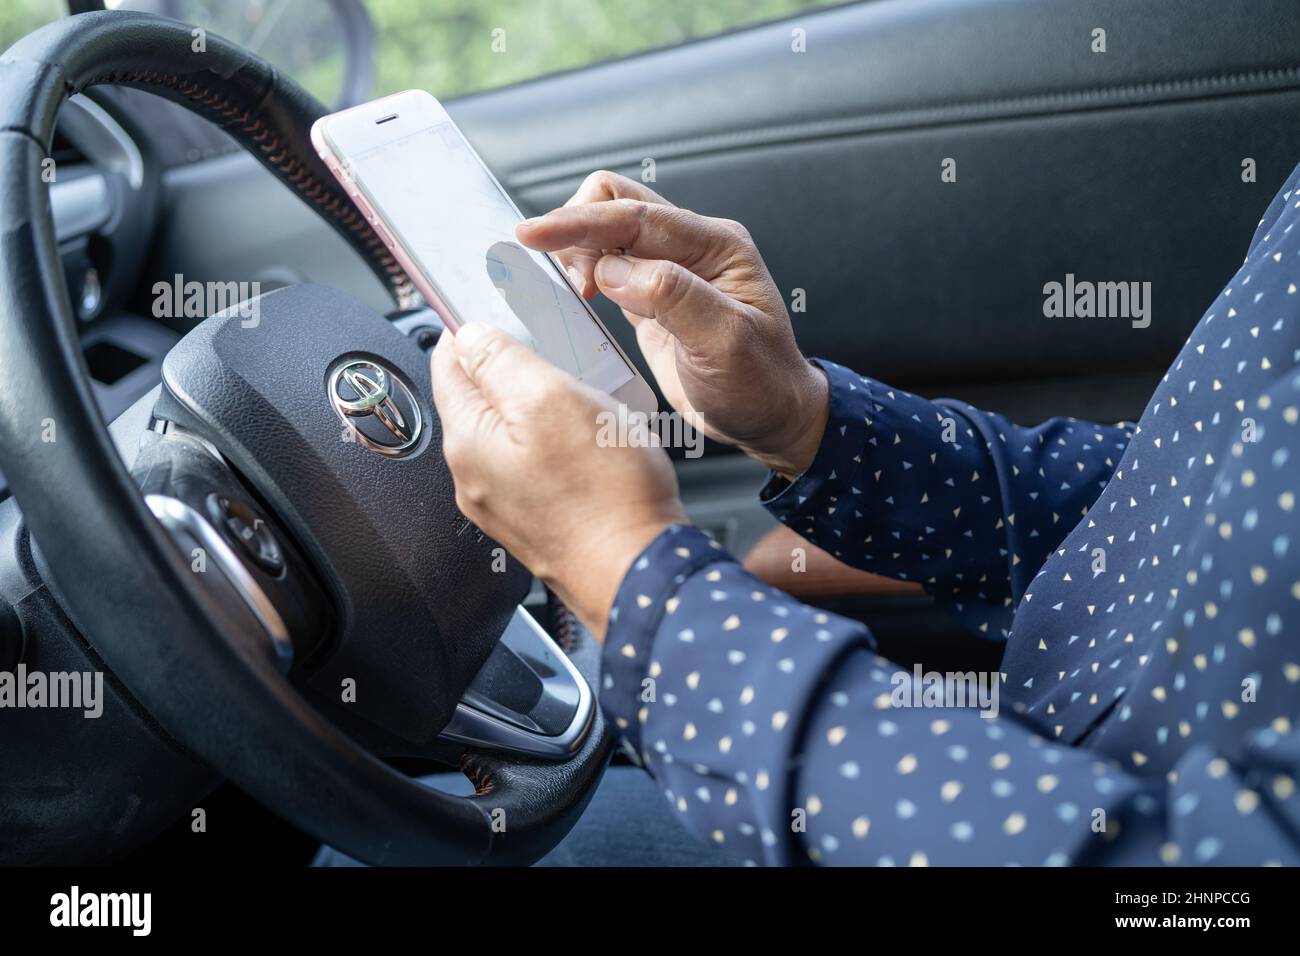 Bangkok, Thailand, July 1, 2021 Holding iPhone in toyota sienta car to communication with family and friends. Stock Photo